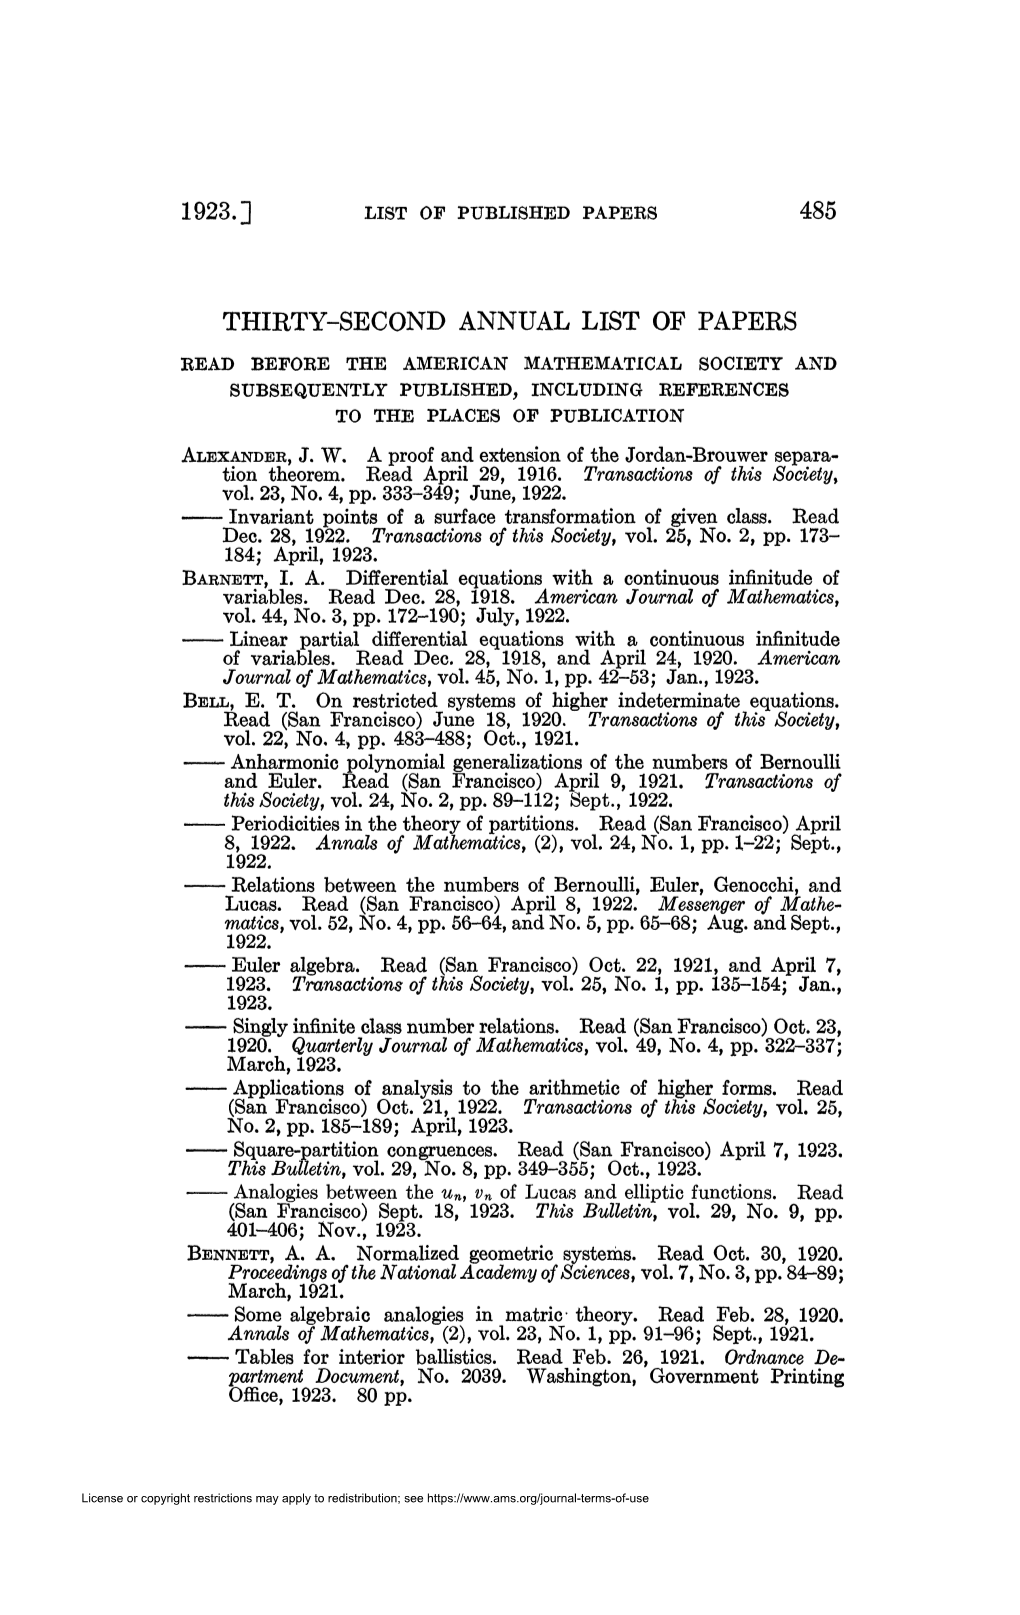 Thirty-Second Annual List of Papers